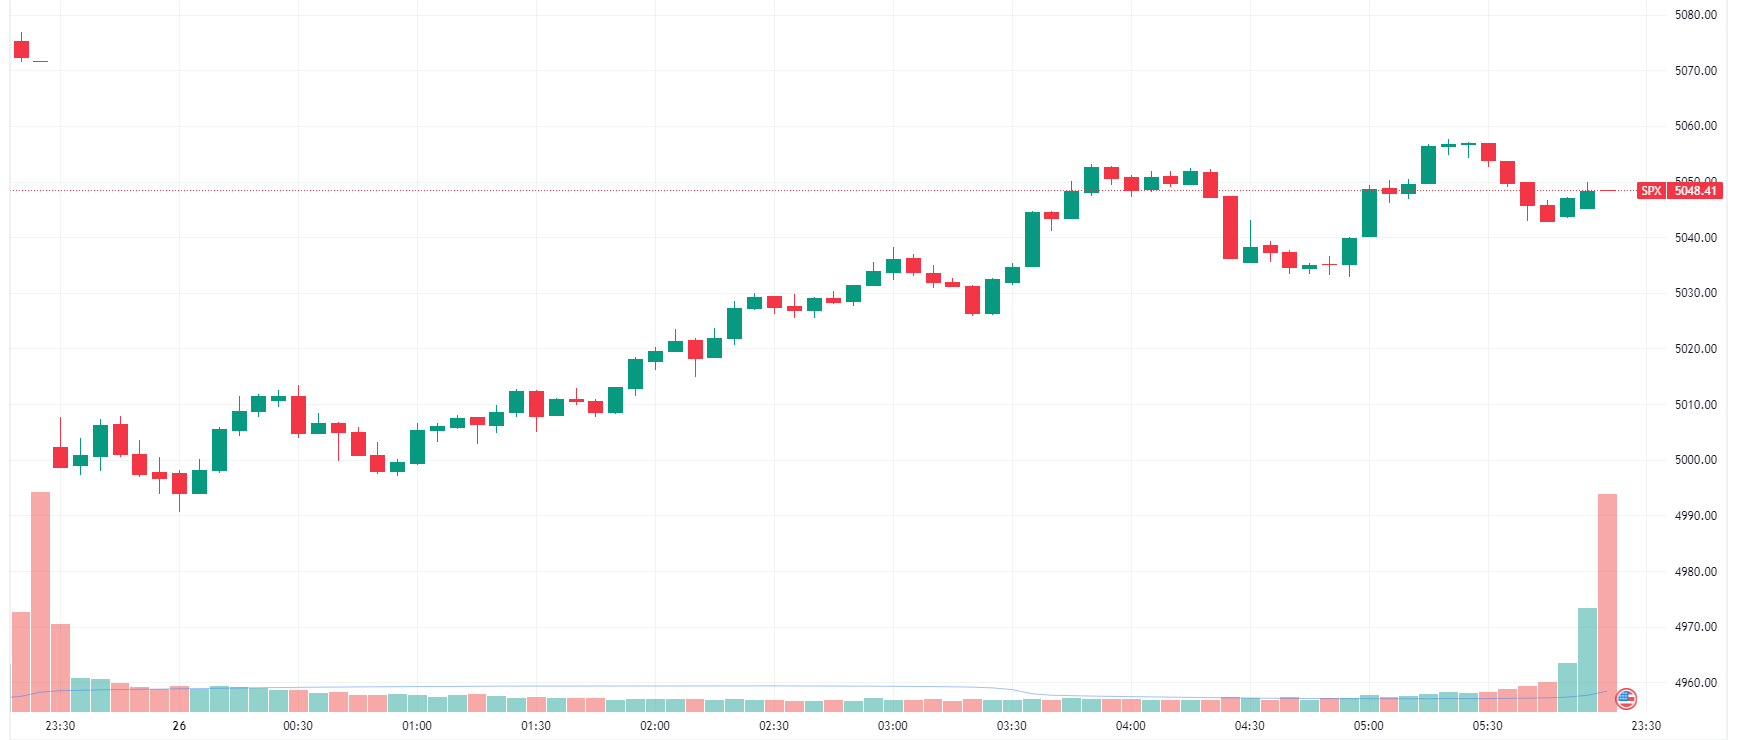 S&P 500 recovers some of its early morning losses (Source: TradingView)